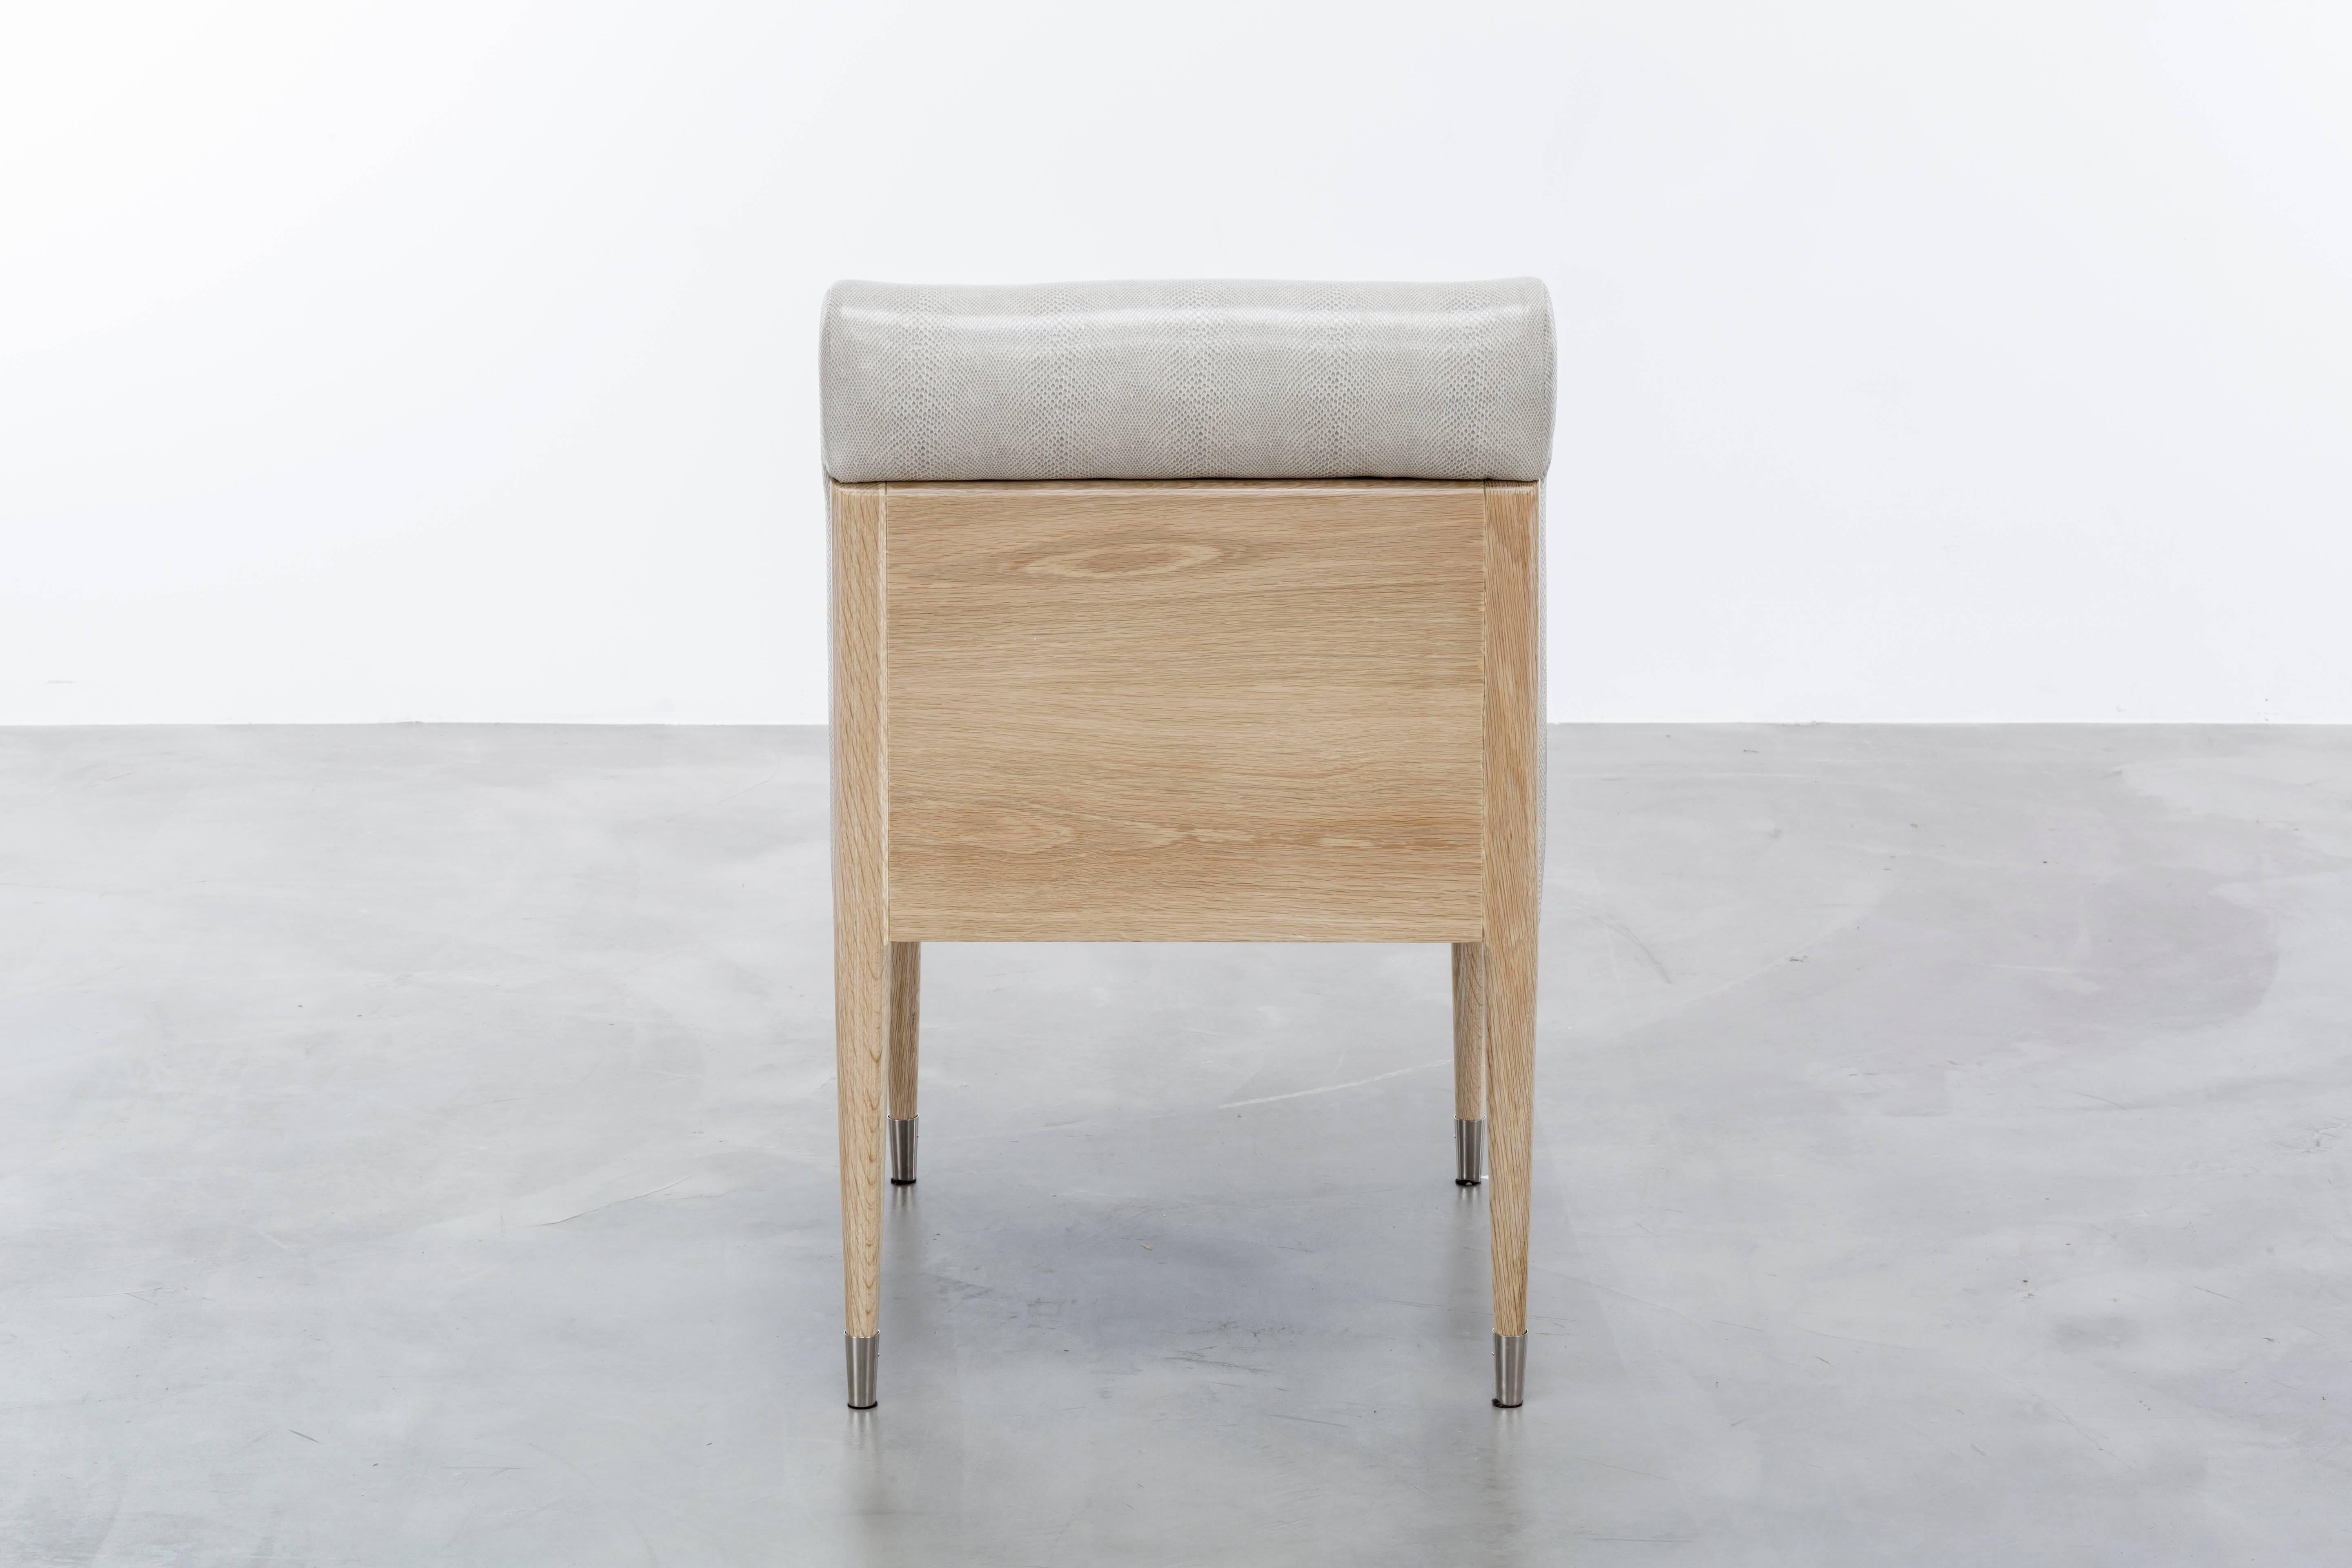 American HERVE CHAIR - Minimal Modern Chair with a Wood Frame and Metal Ferrules.